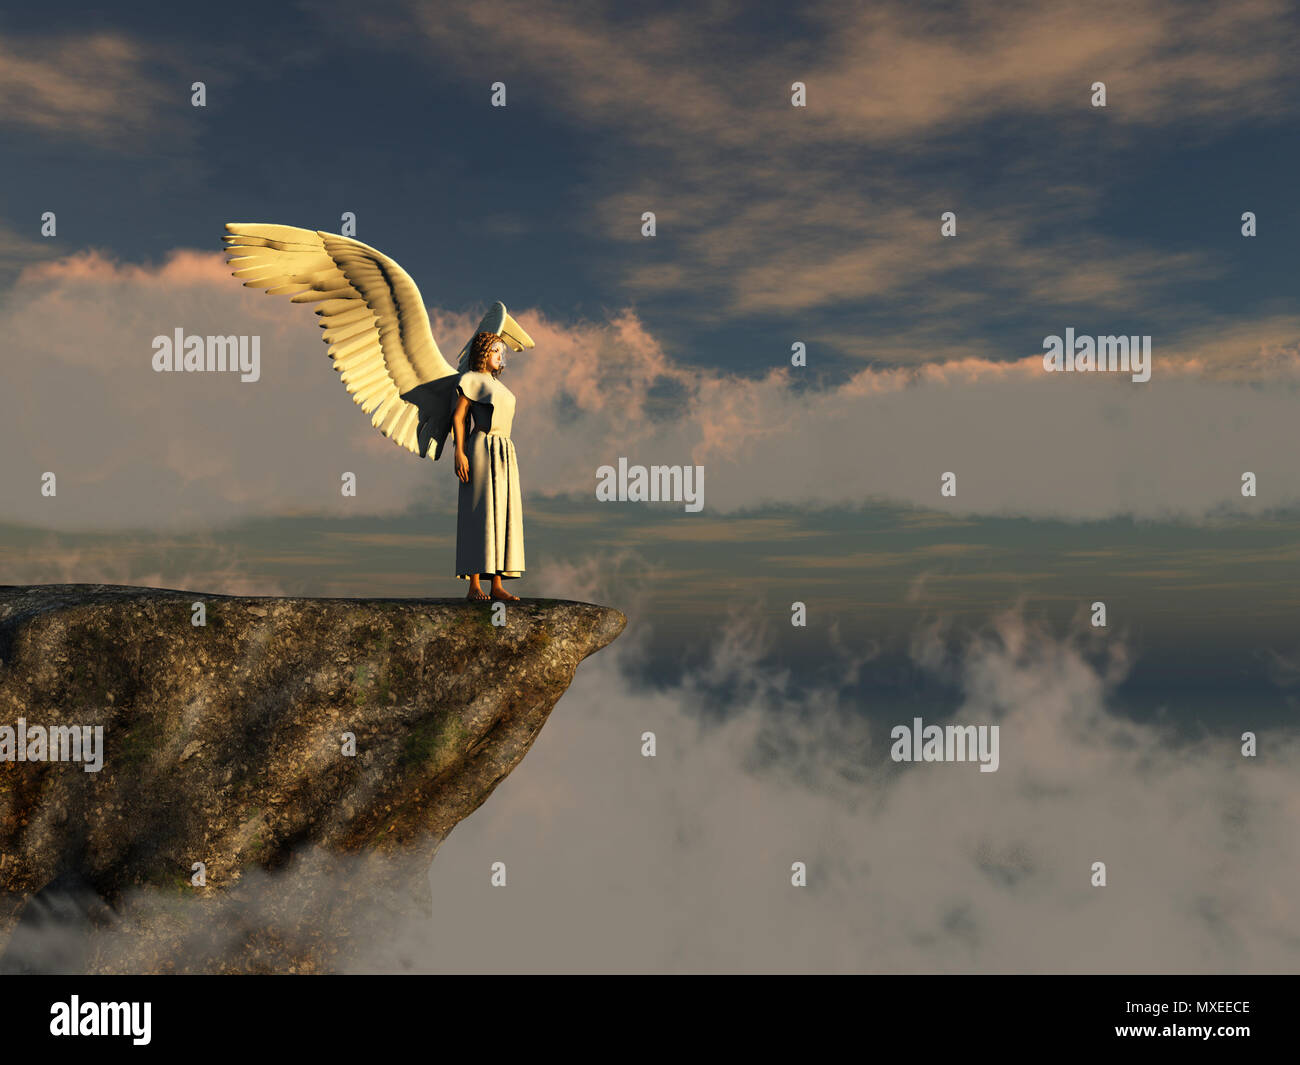 Winged woman on the edge of a cliff Stock Photo